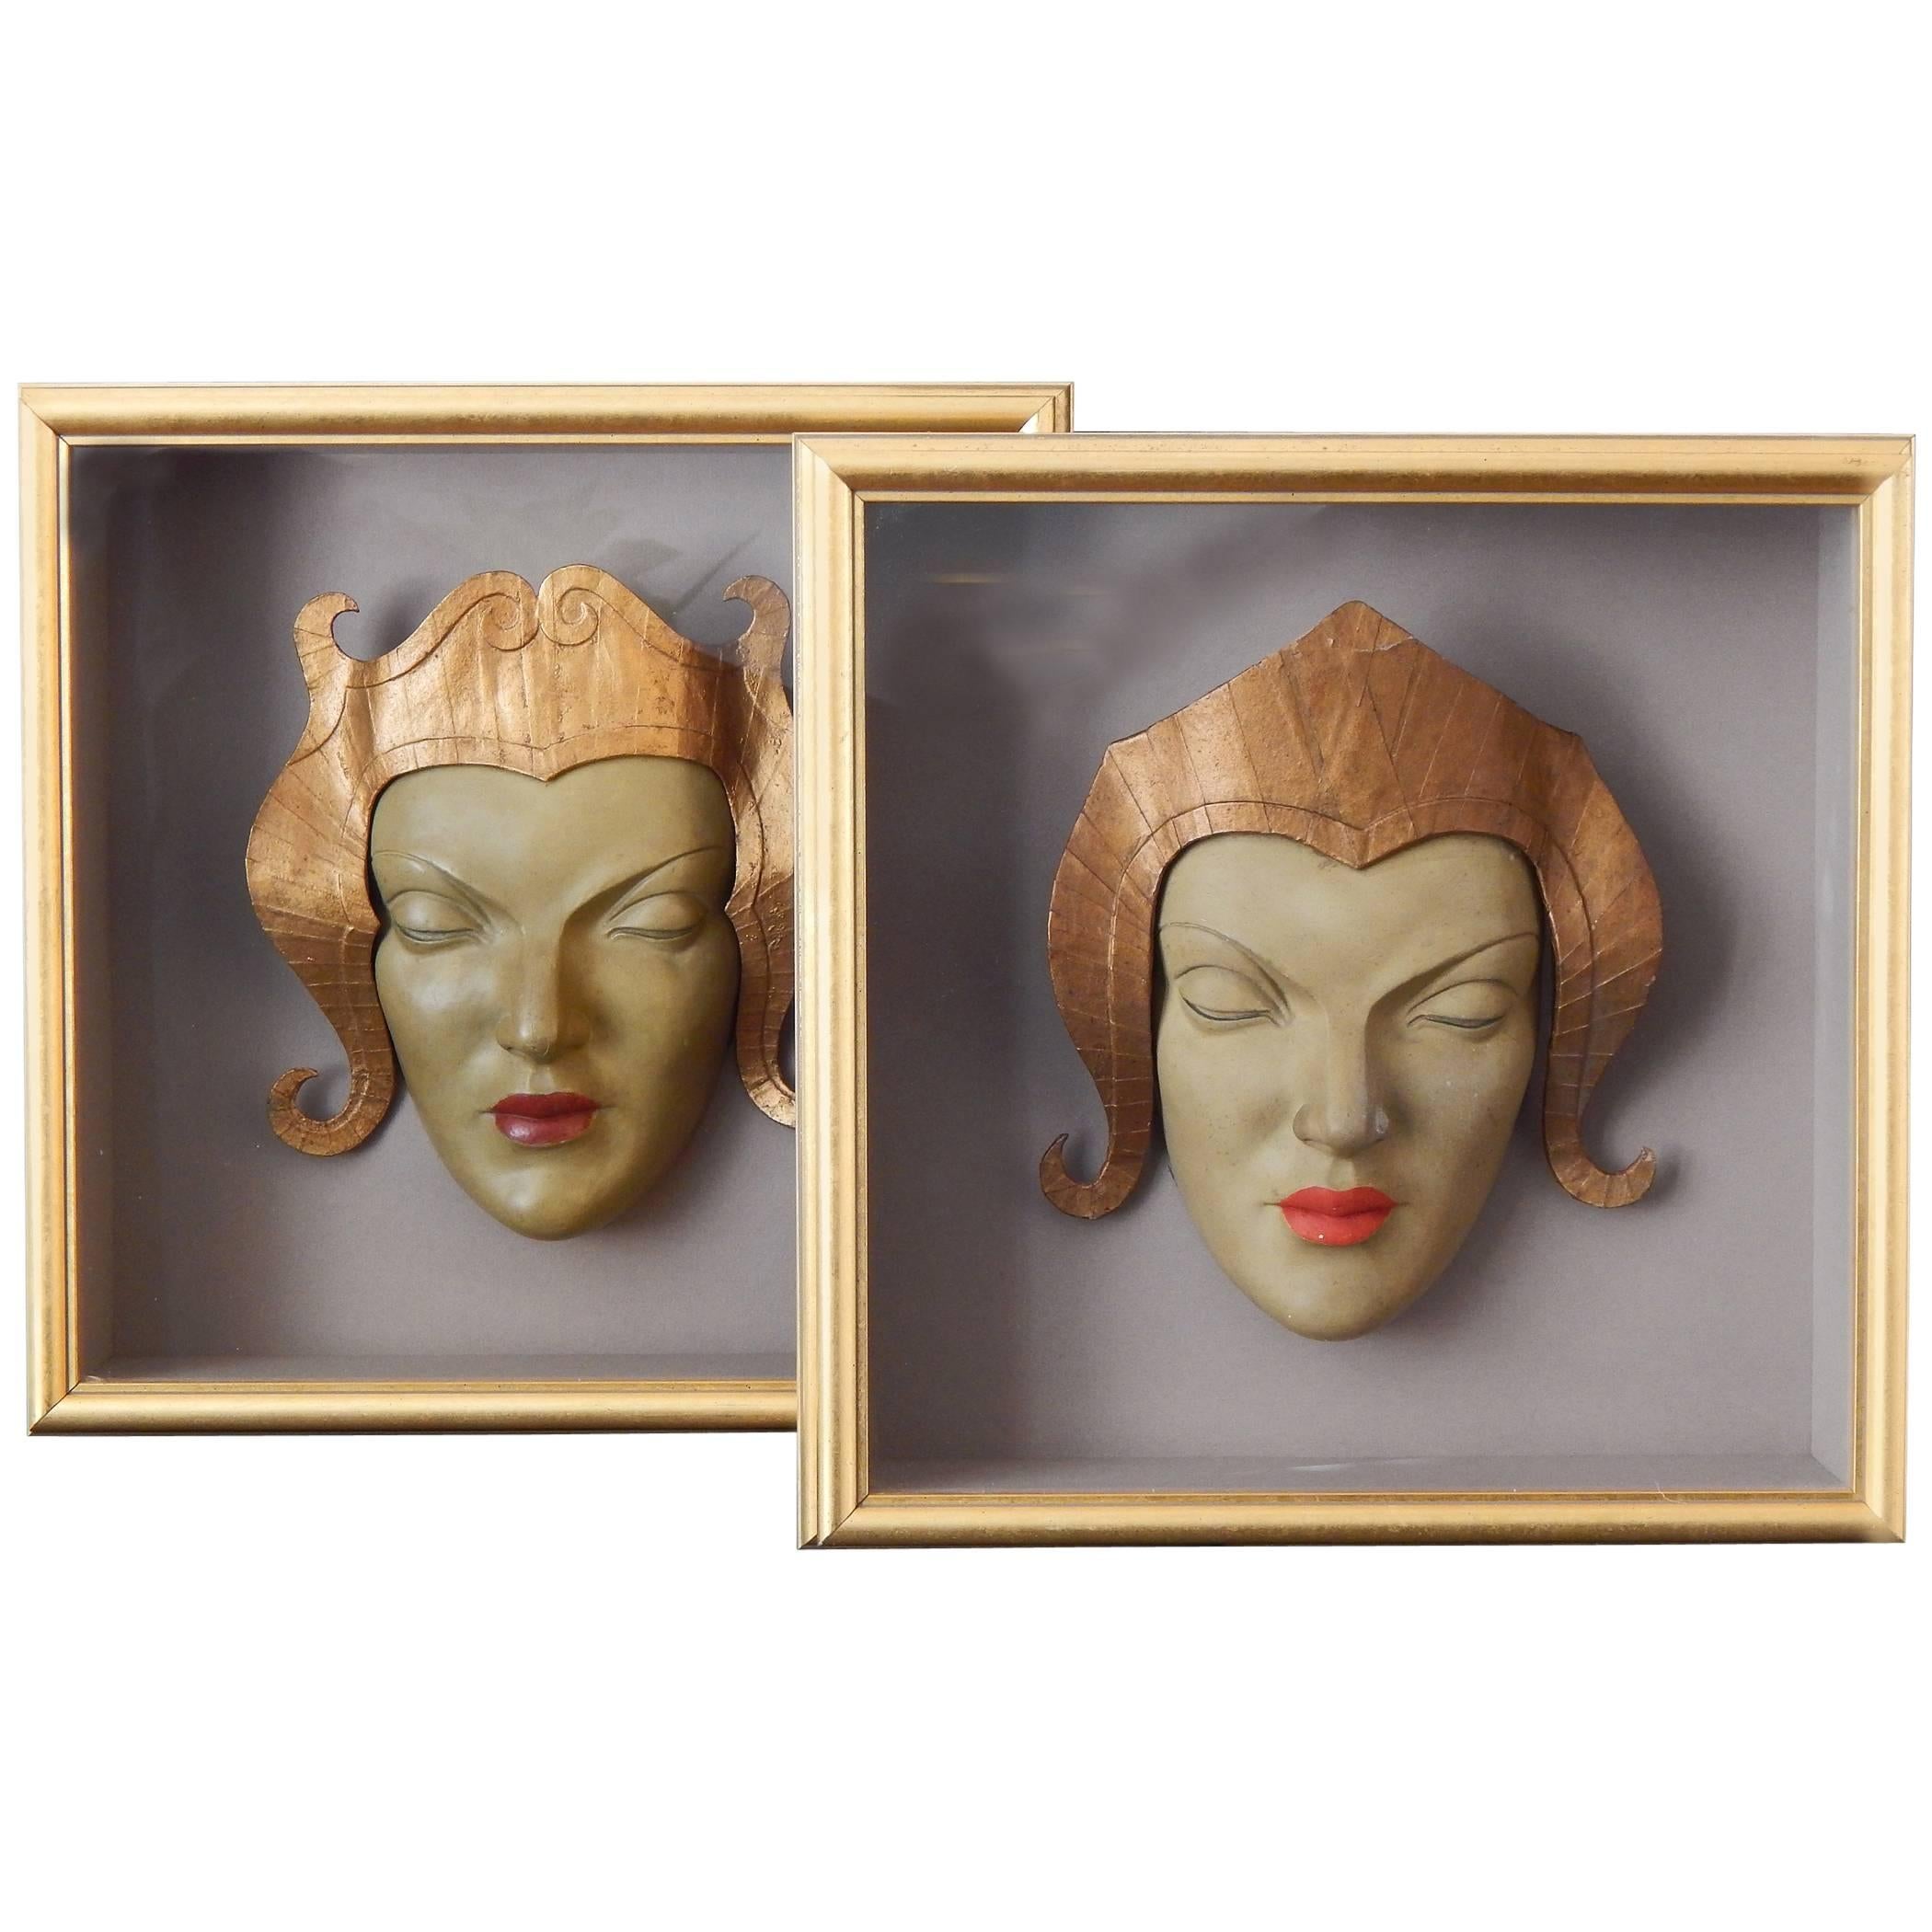 Fabulous Pair of Art Deco Masks in Asian Headdresses, Shadow Boxed For Sale